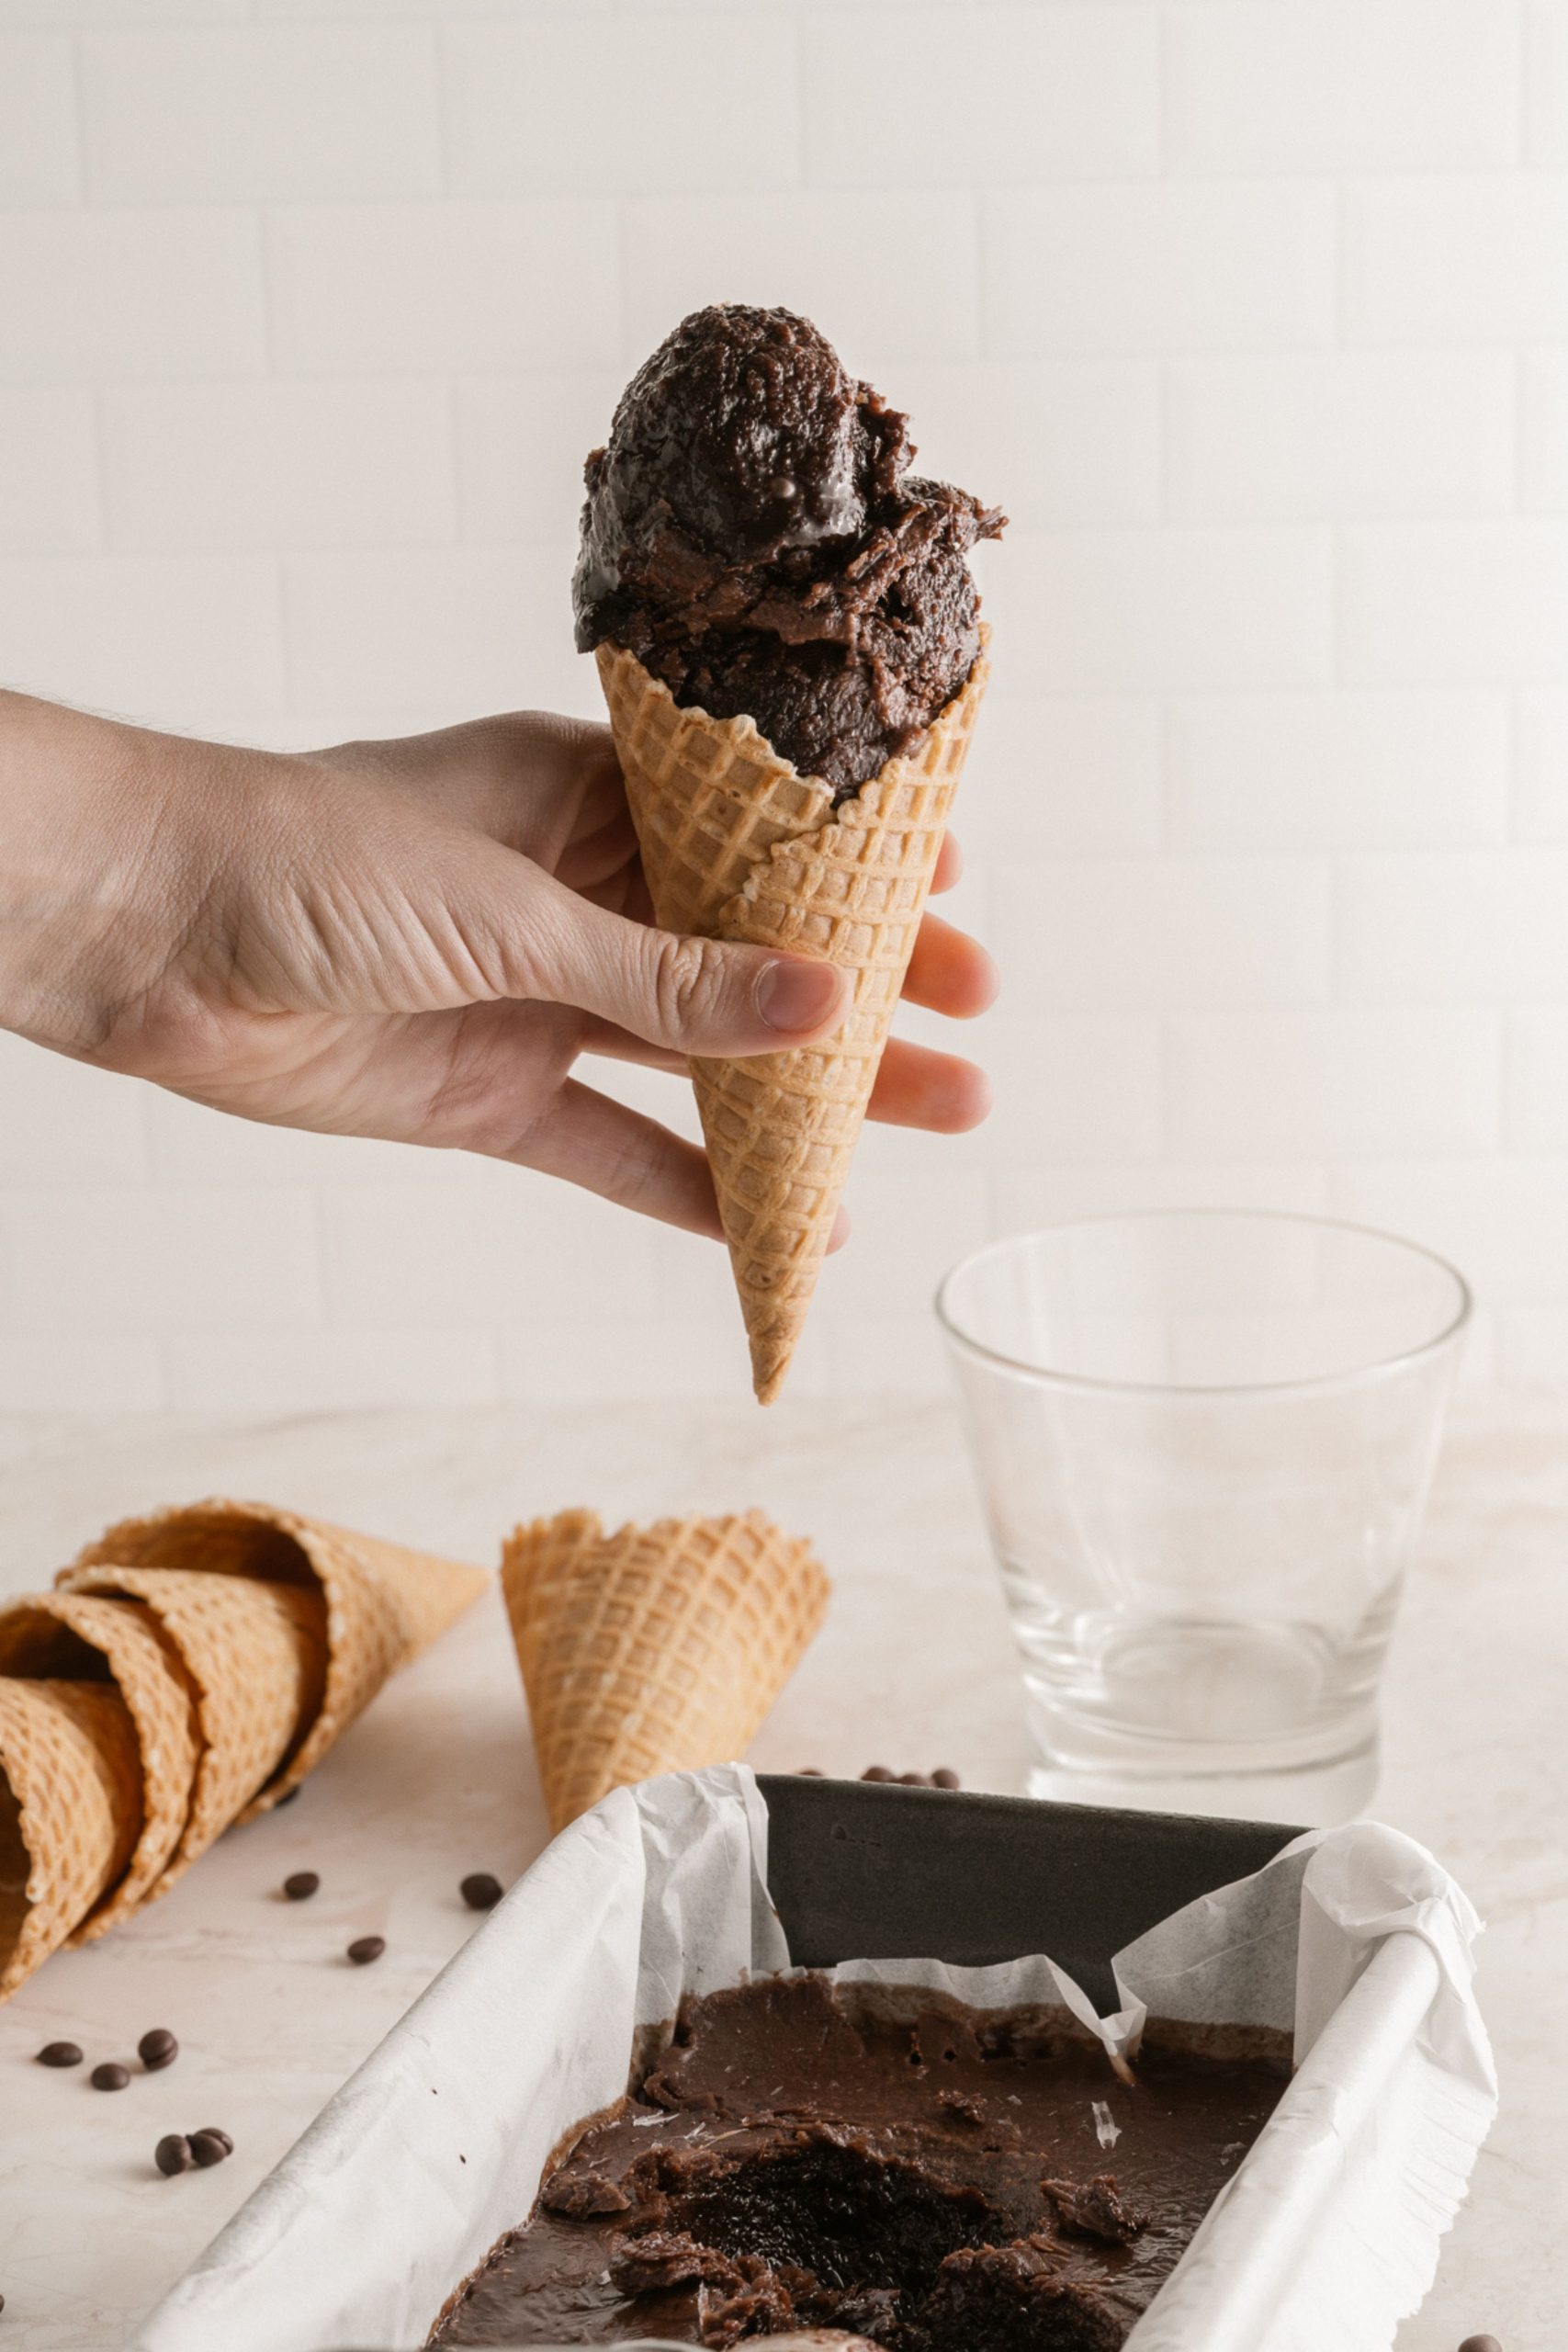 This no-churn Vegan Chocolate Sorbet is made with simple 5 ingredients. It's easy to make and is ready to set in just 10 minutes. This sorbet is light, sweet and very chocolatey in the end. Enjoy it in cups or cones.